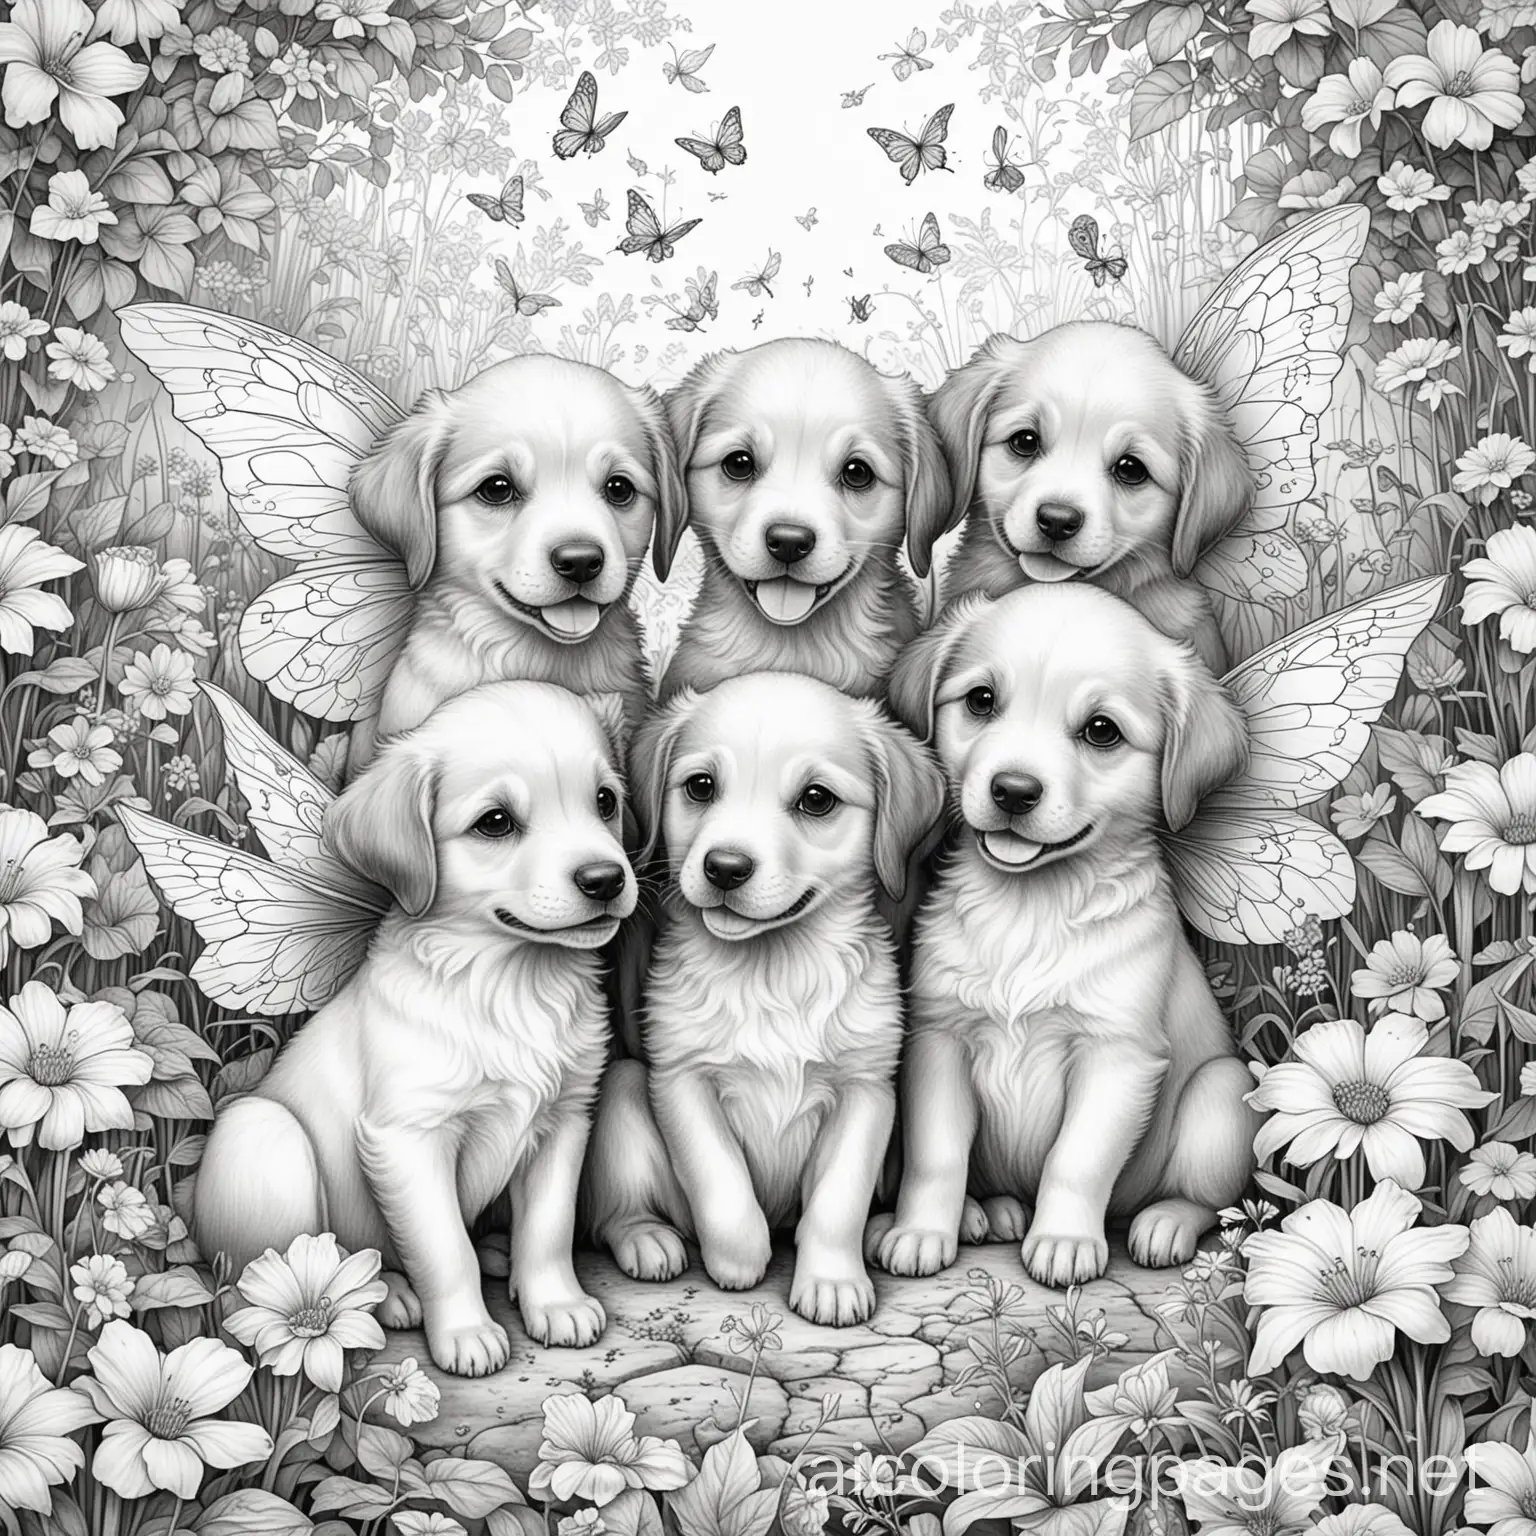 happy puppies surrounded by kind fairies in a flower garden, Coloring Page, black and white, line art, white background, Simplicity, Ample White Space. The background of the coloring page is plain white to make it easy for young children to color within the lines. The outlines of all the subjects are easy to distinguish, making it simple for kids to color without too much difficulty